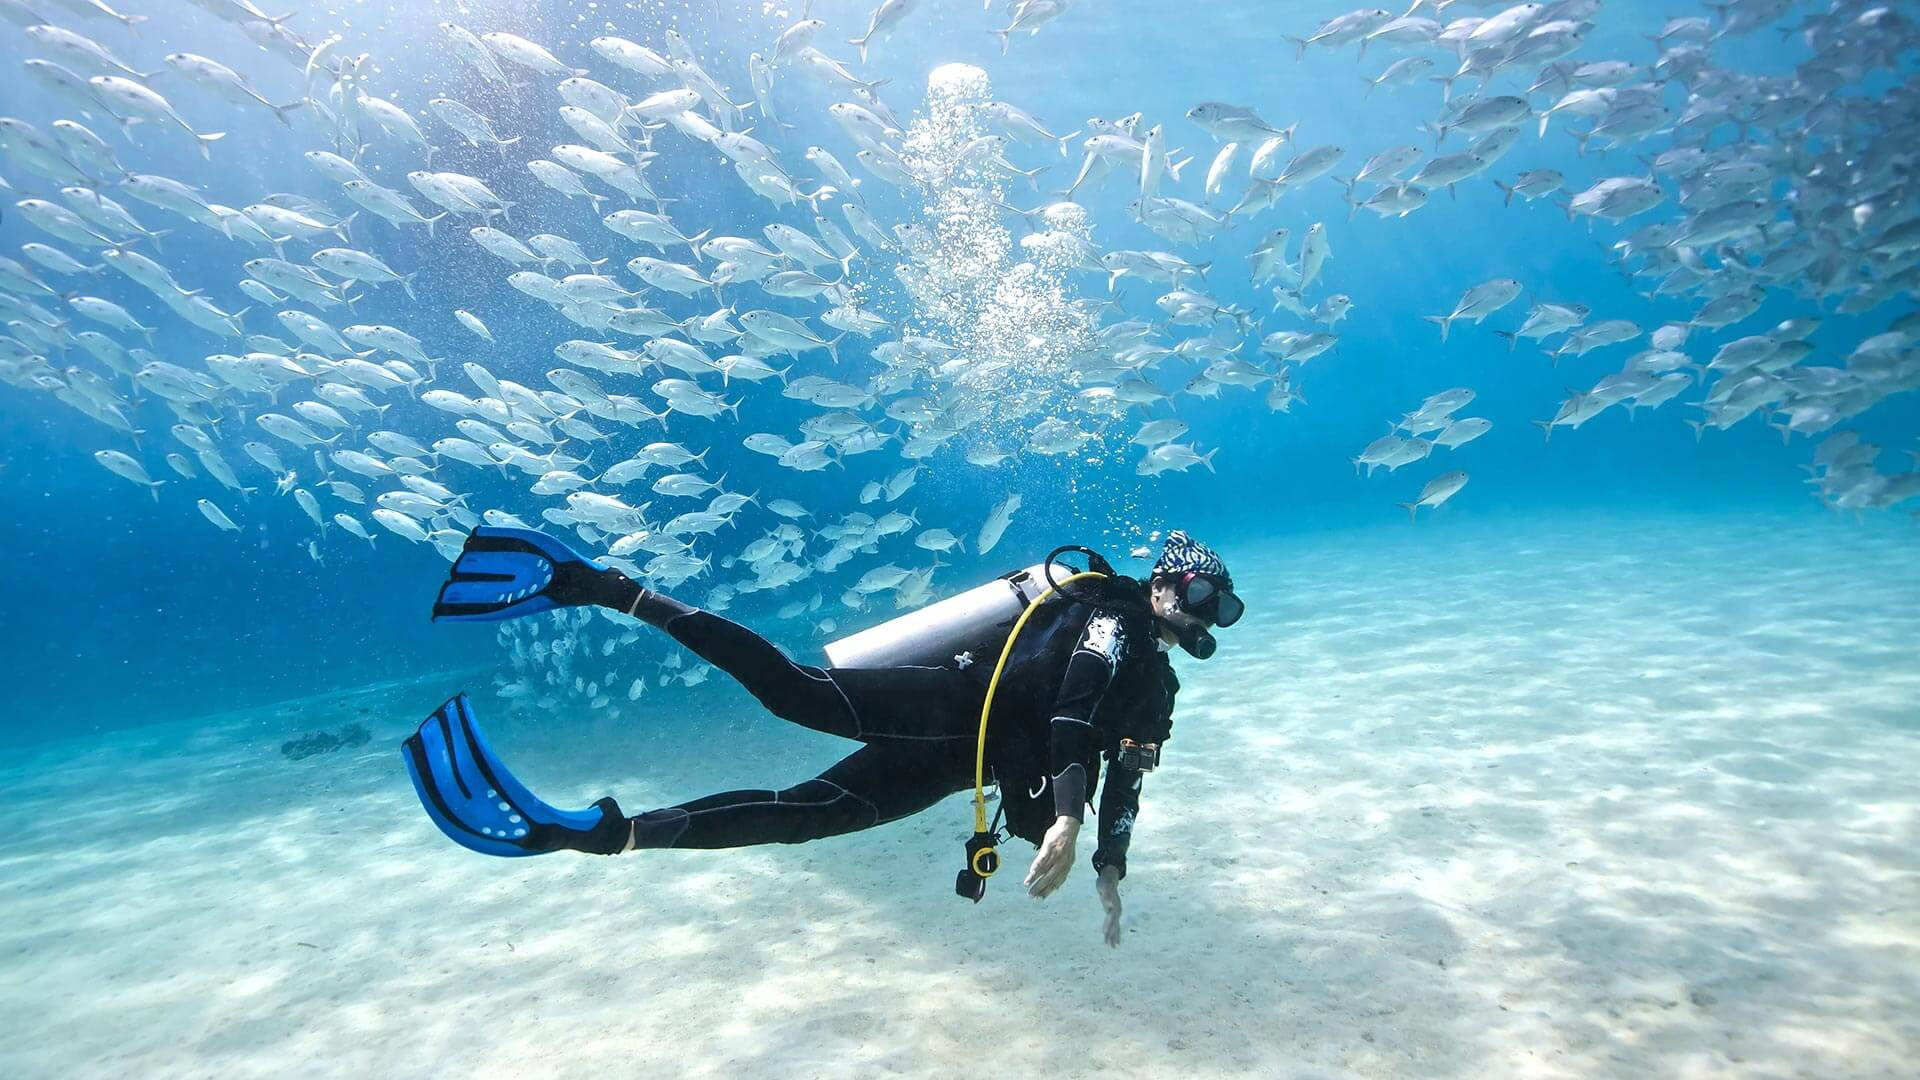 Scuba Diving With School Of Fish Background